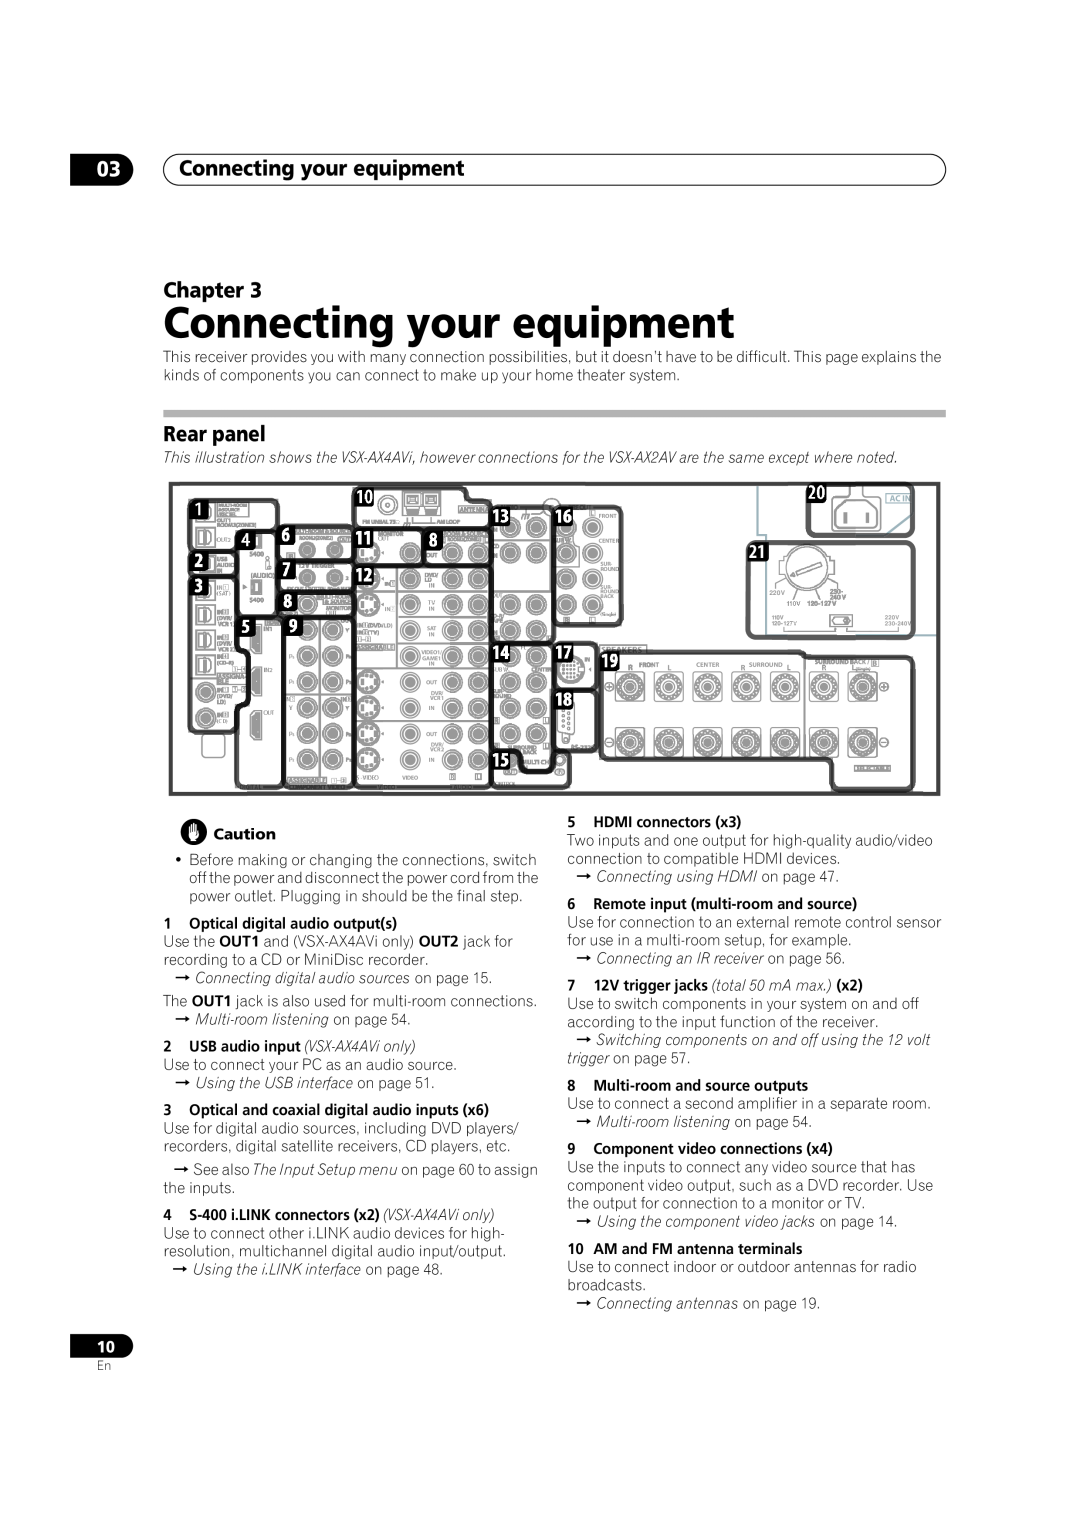 Pioneer VSX-AX2AV-G manual 03Connecting your equipment Chapter, Rear panel, Connecting digital audio sources on page 